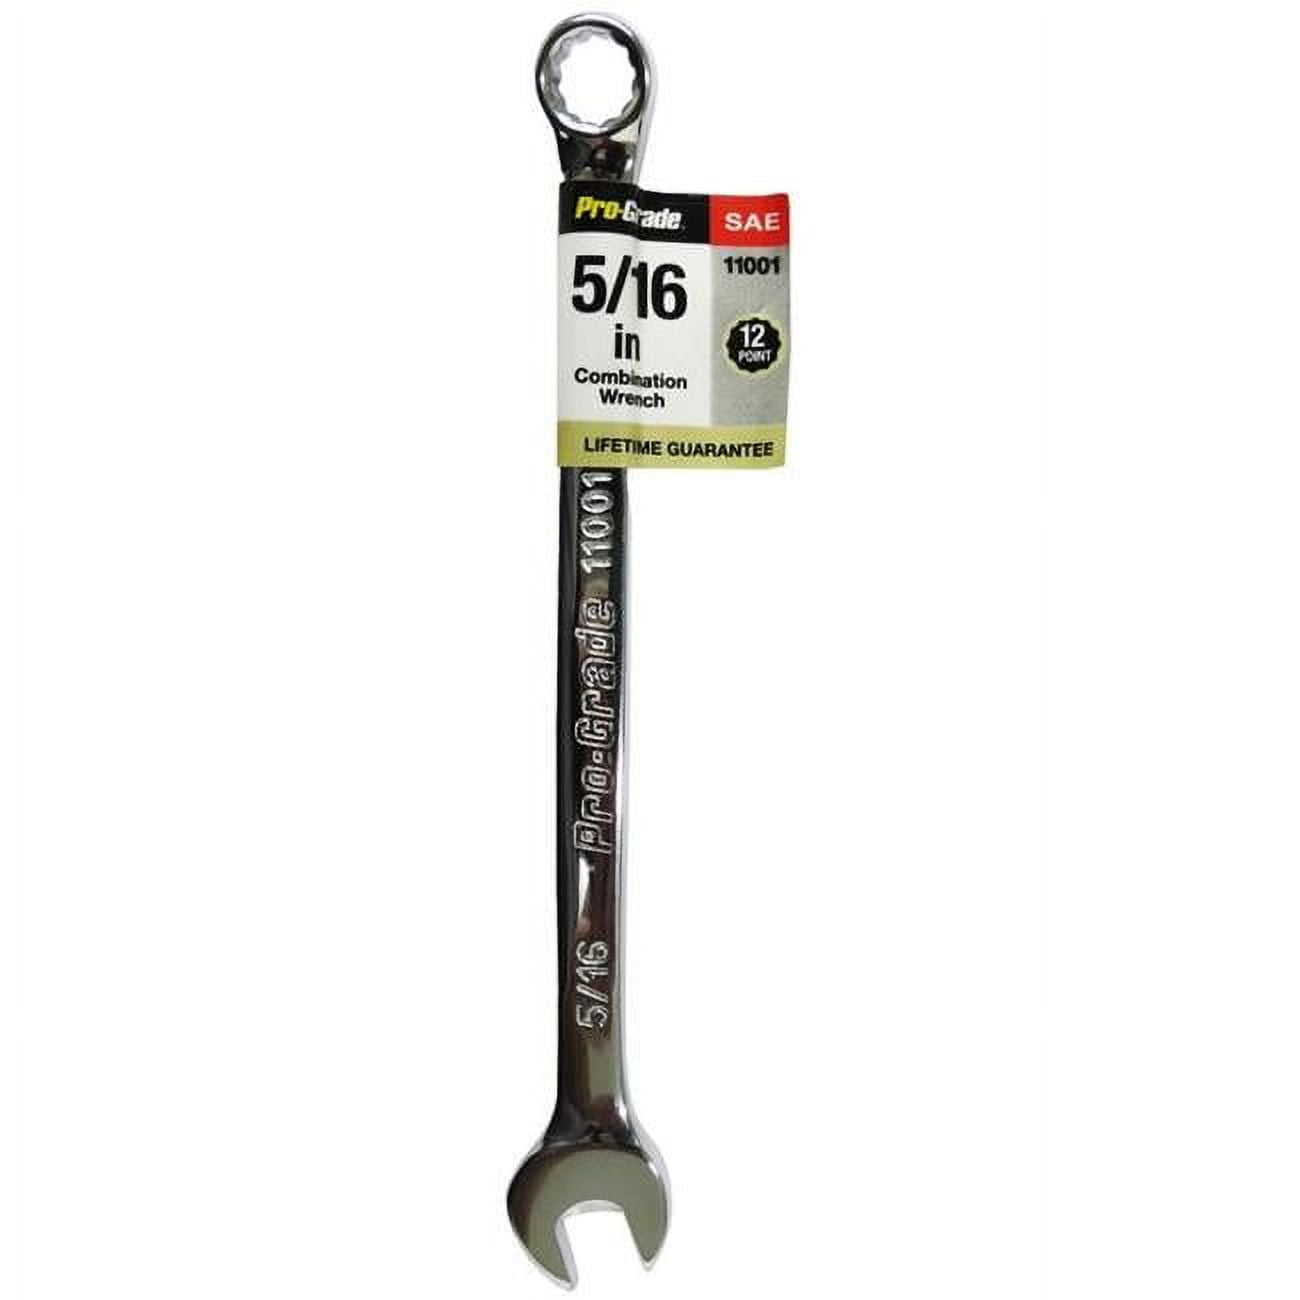 Picture of Pro-Grade 11001 0.31 in. Combination Wrench